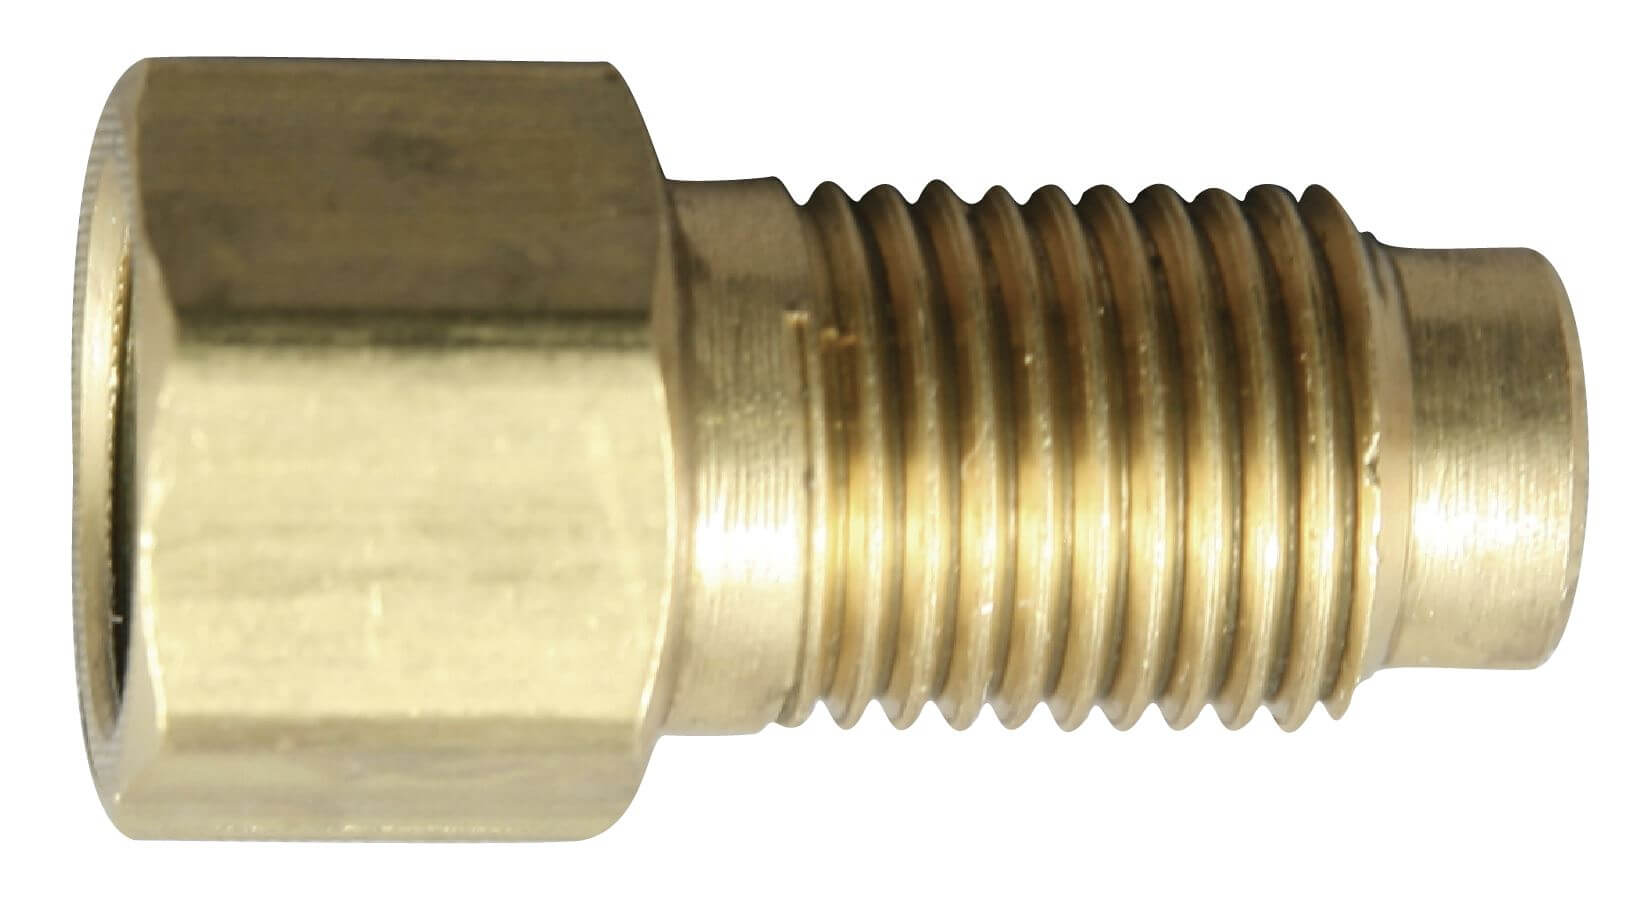 Tacoma Screw Products  1/4 SAE 45 Flare Brass Fitting - Flare Cap Nut